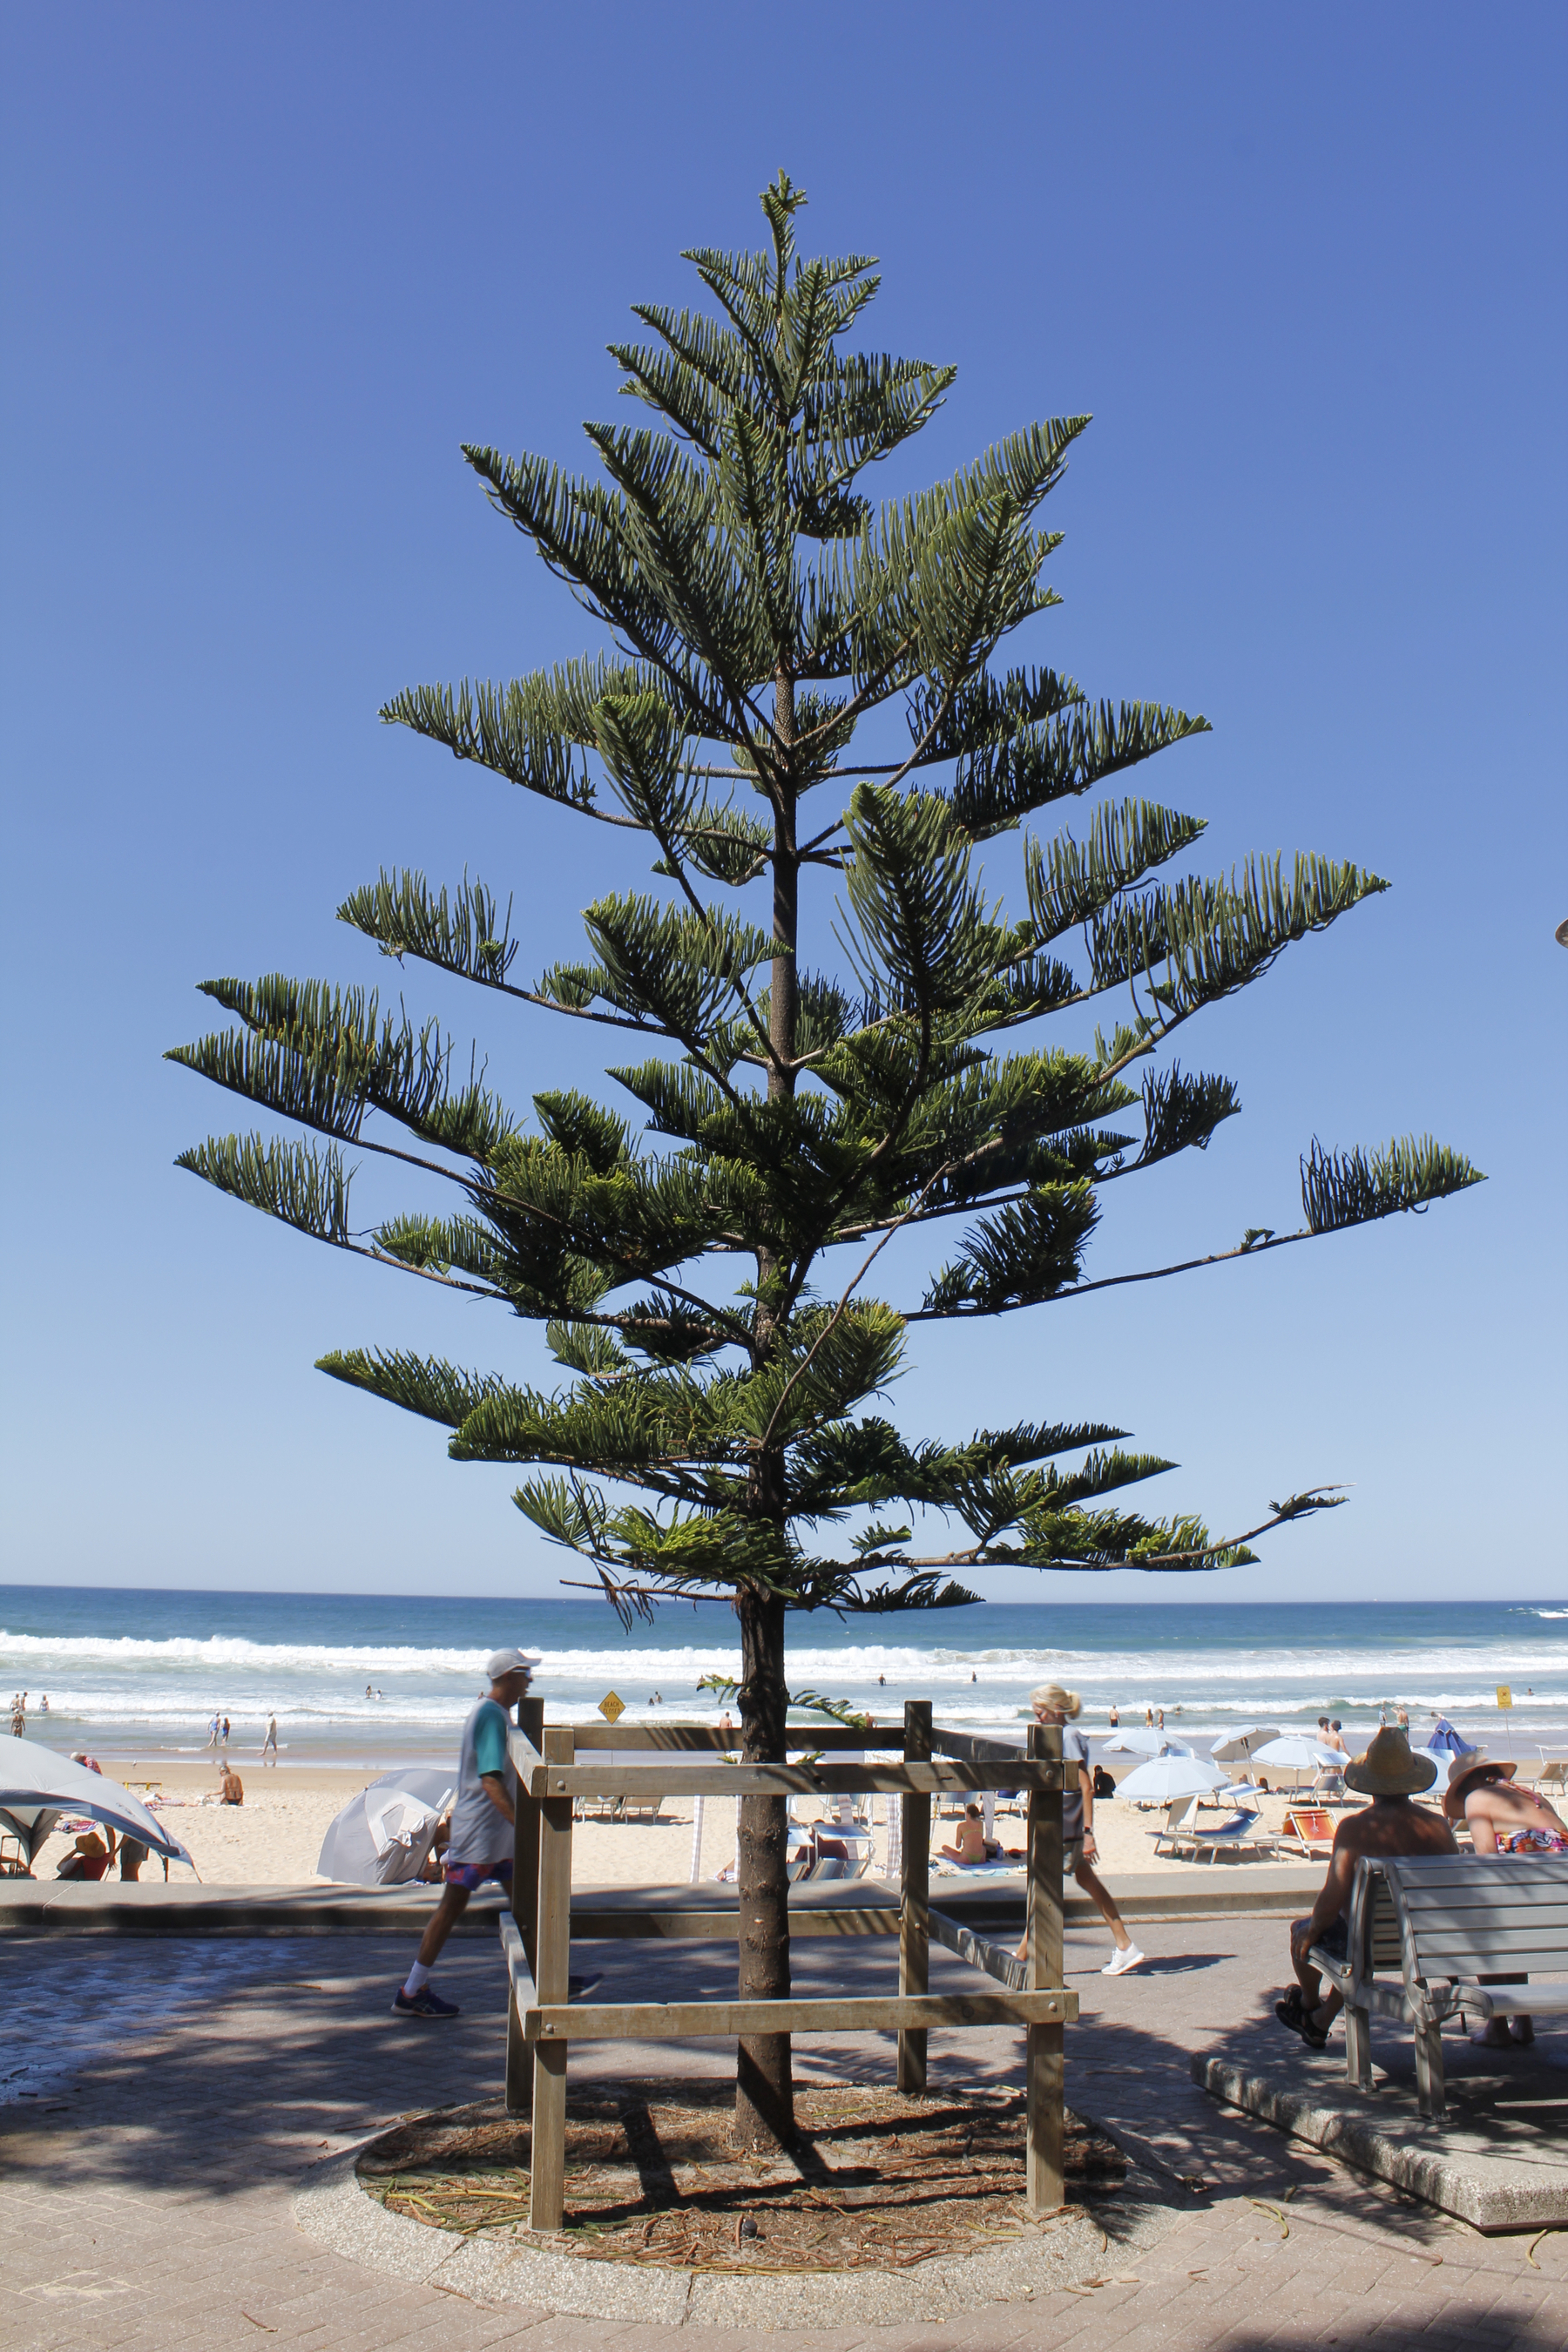 A small Norfolk Island Pine Tree stands within its protective timber fence on a walkway overlooking a beach filled with umbrellas, gazebos, deck-chairs and people. In the foreground, a man and a woman walking towards each other are about to pass the tree in opposite directions. In the distance, swimmers stand or bob in a small surf. Beyond the white of breaking waves, the ocean matches the sky’s blue intensity.